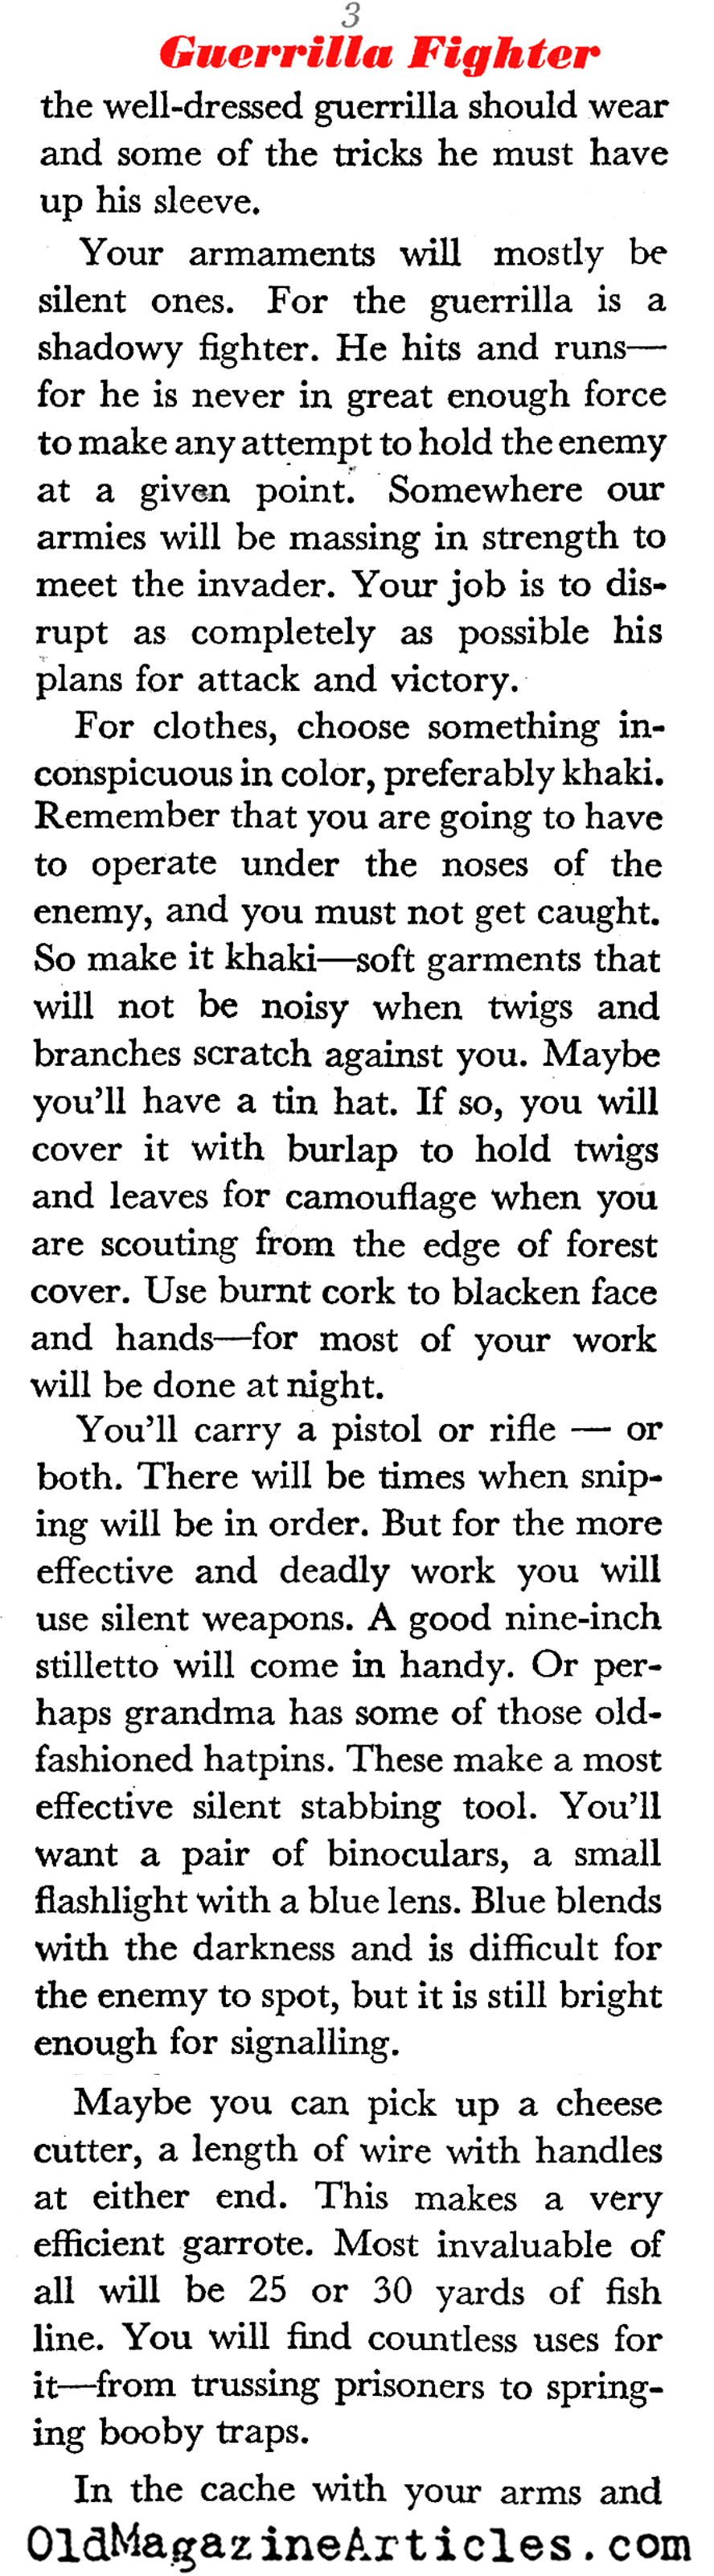 So, You Want to Be a Guerrilla? (Coronet Magazine, 1942)